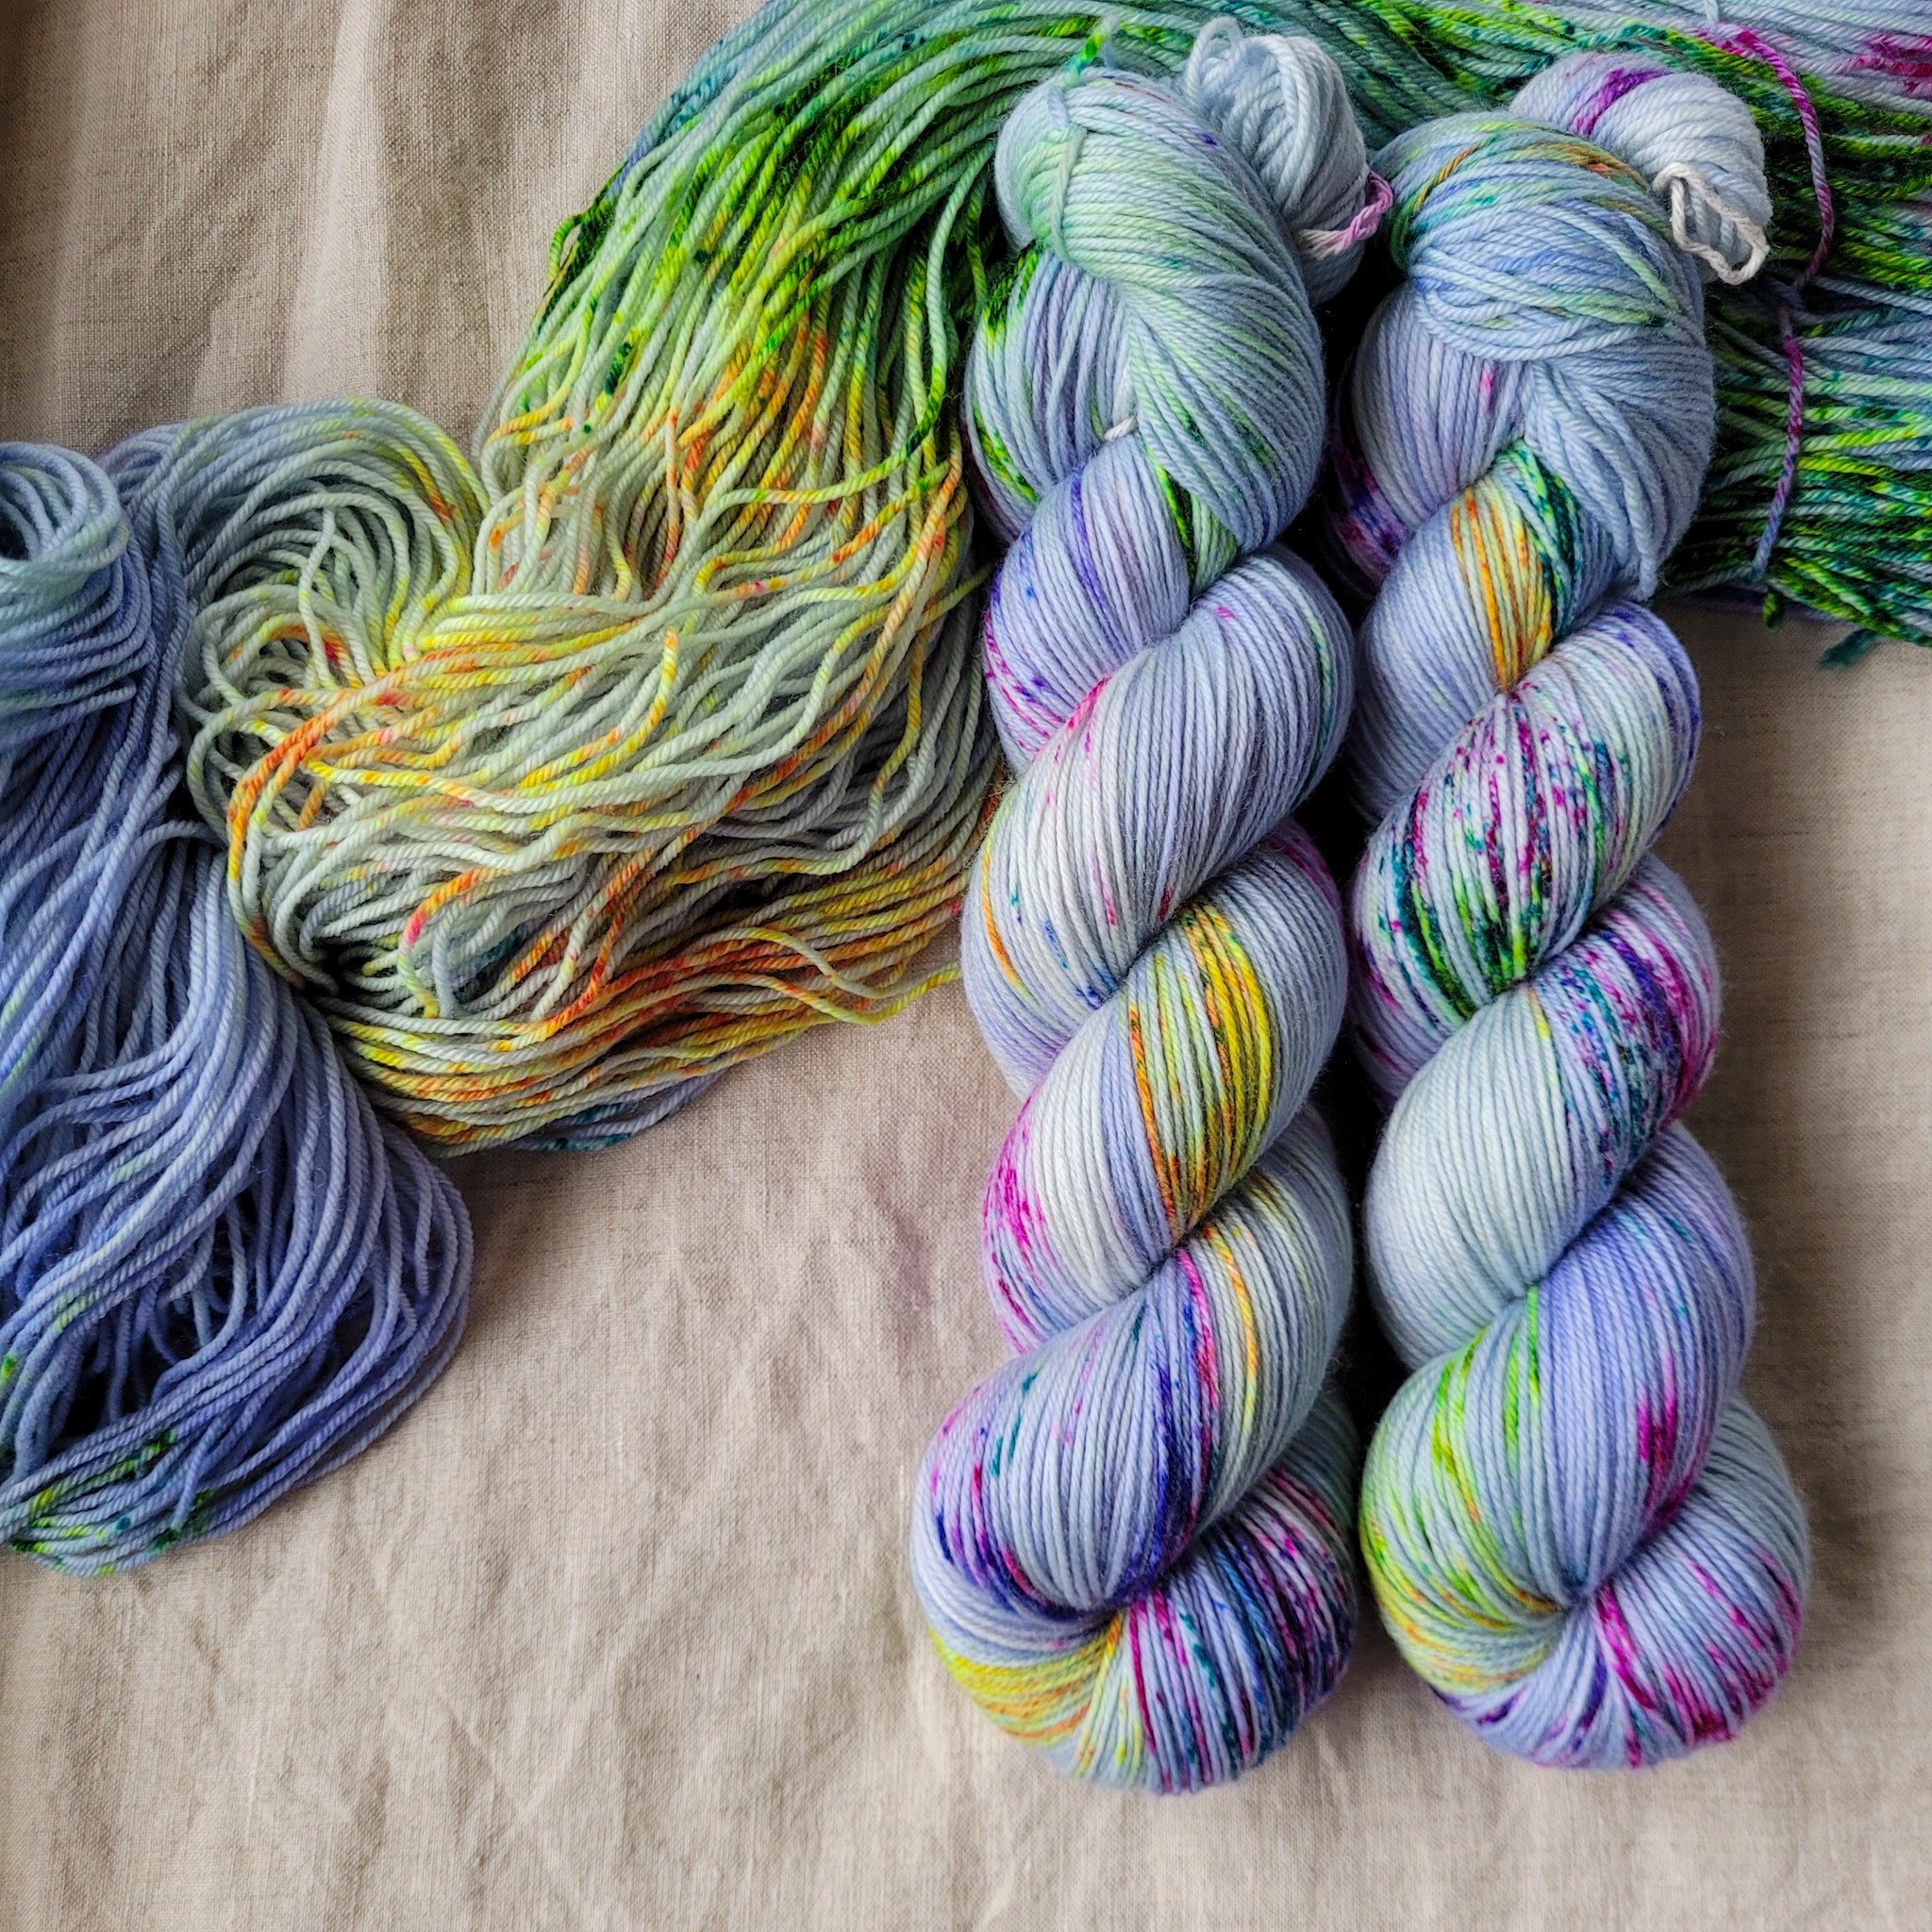 Skeins of purple and pink hand dyed yarn